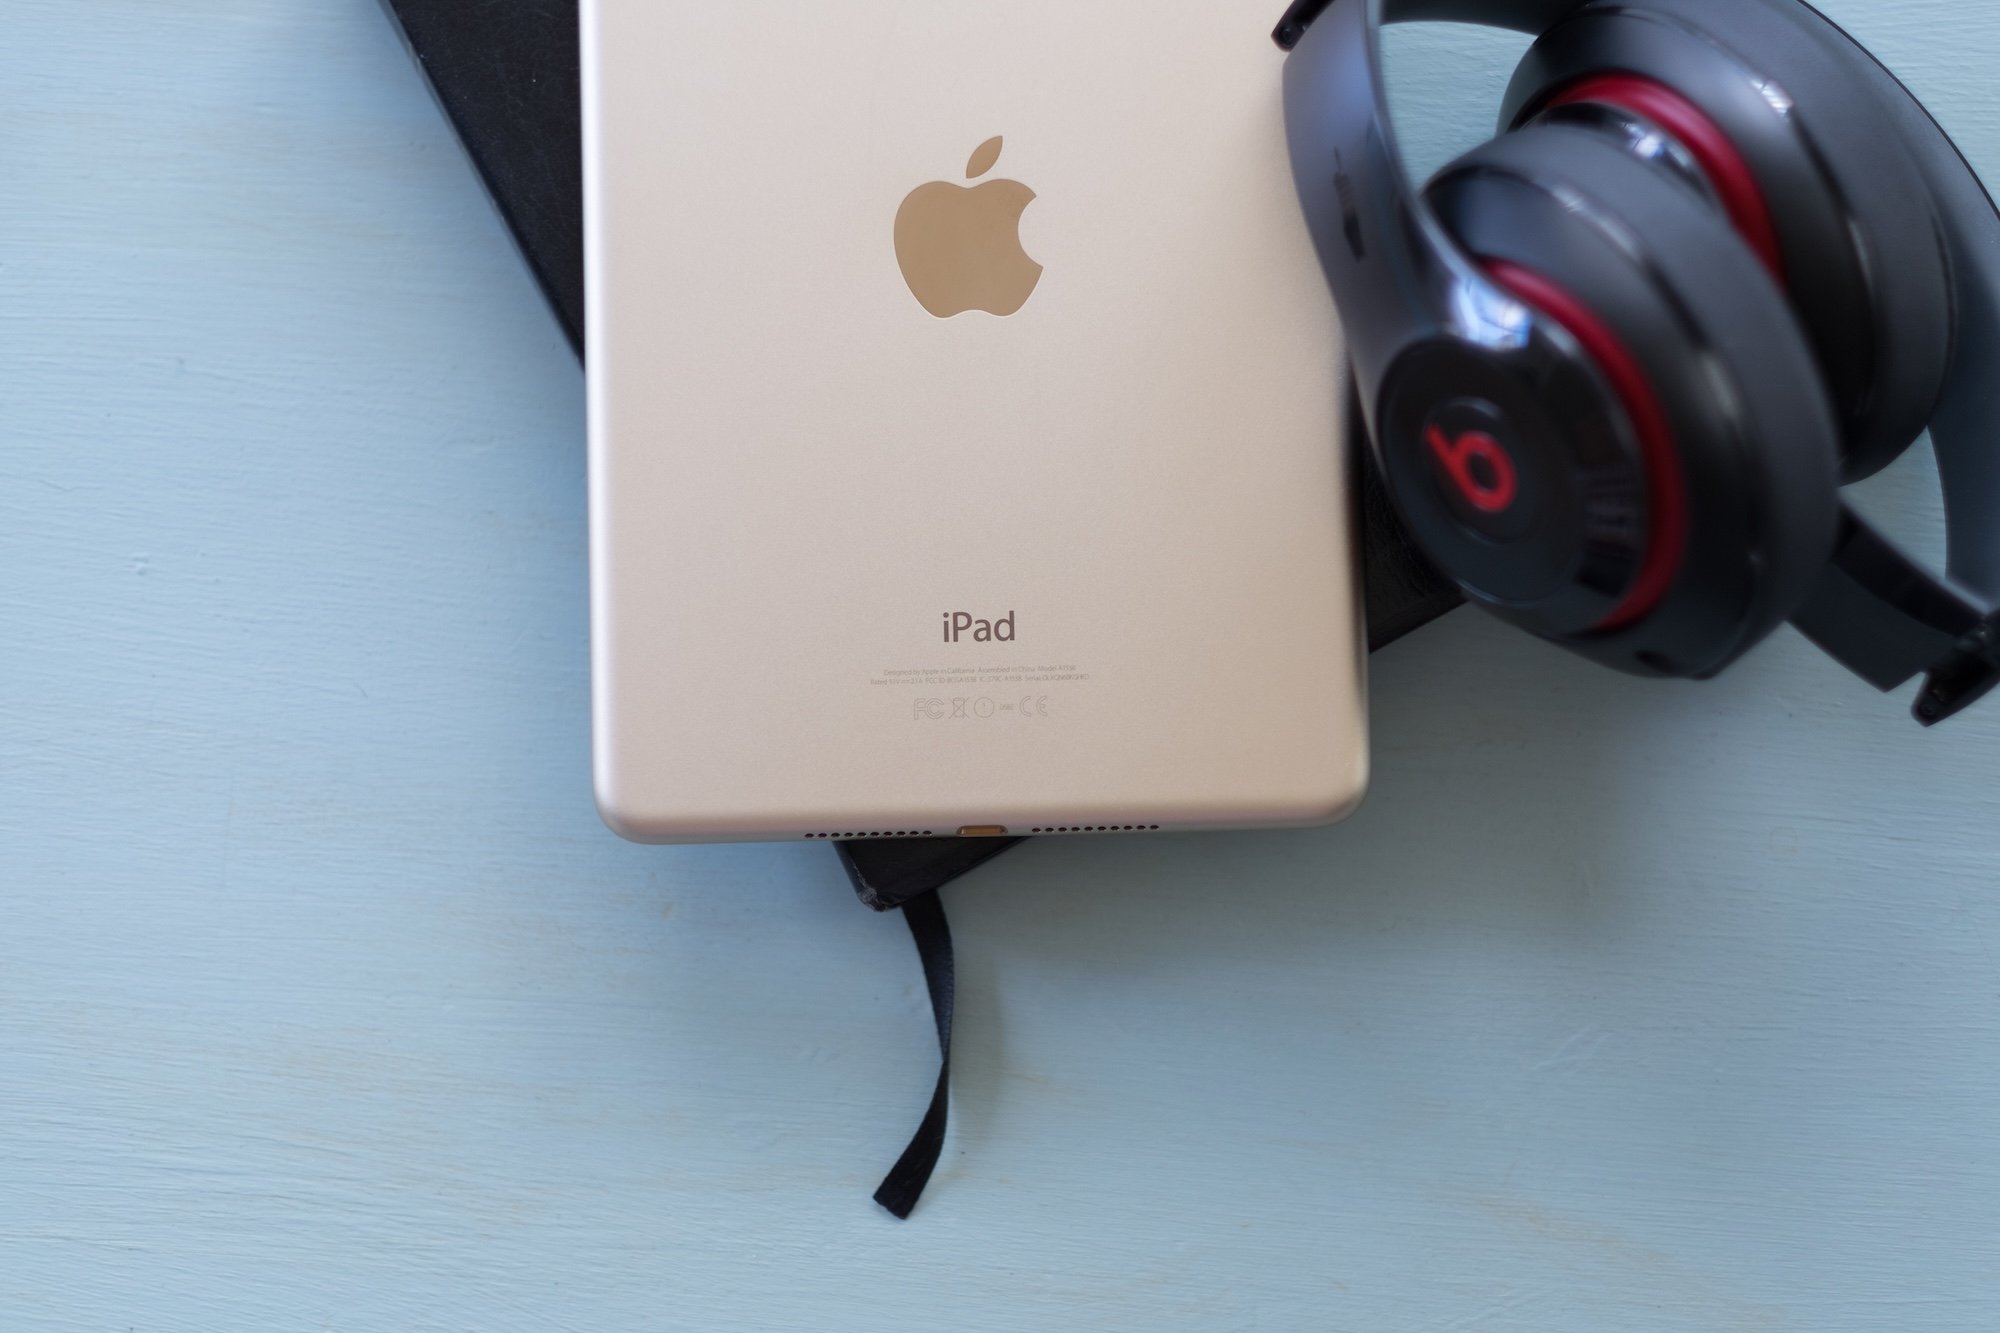 iPad and headphones laying on a table